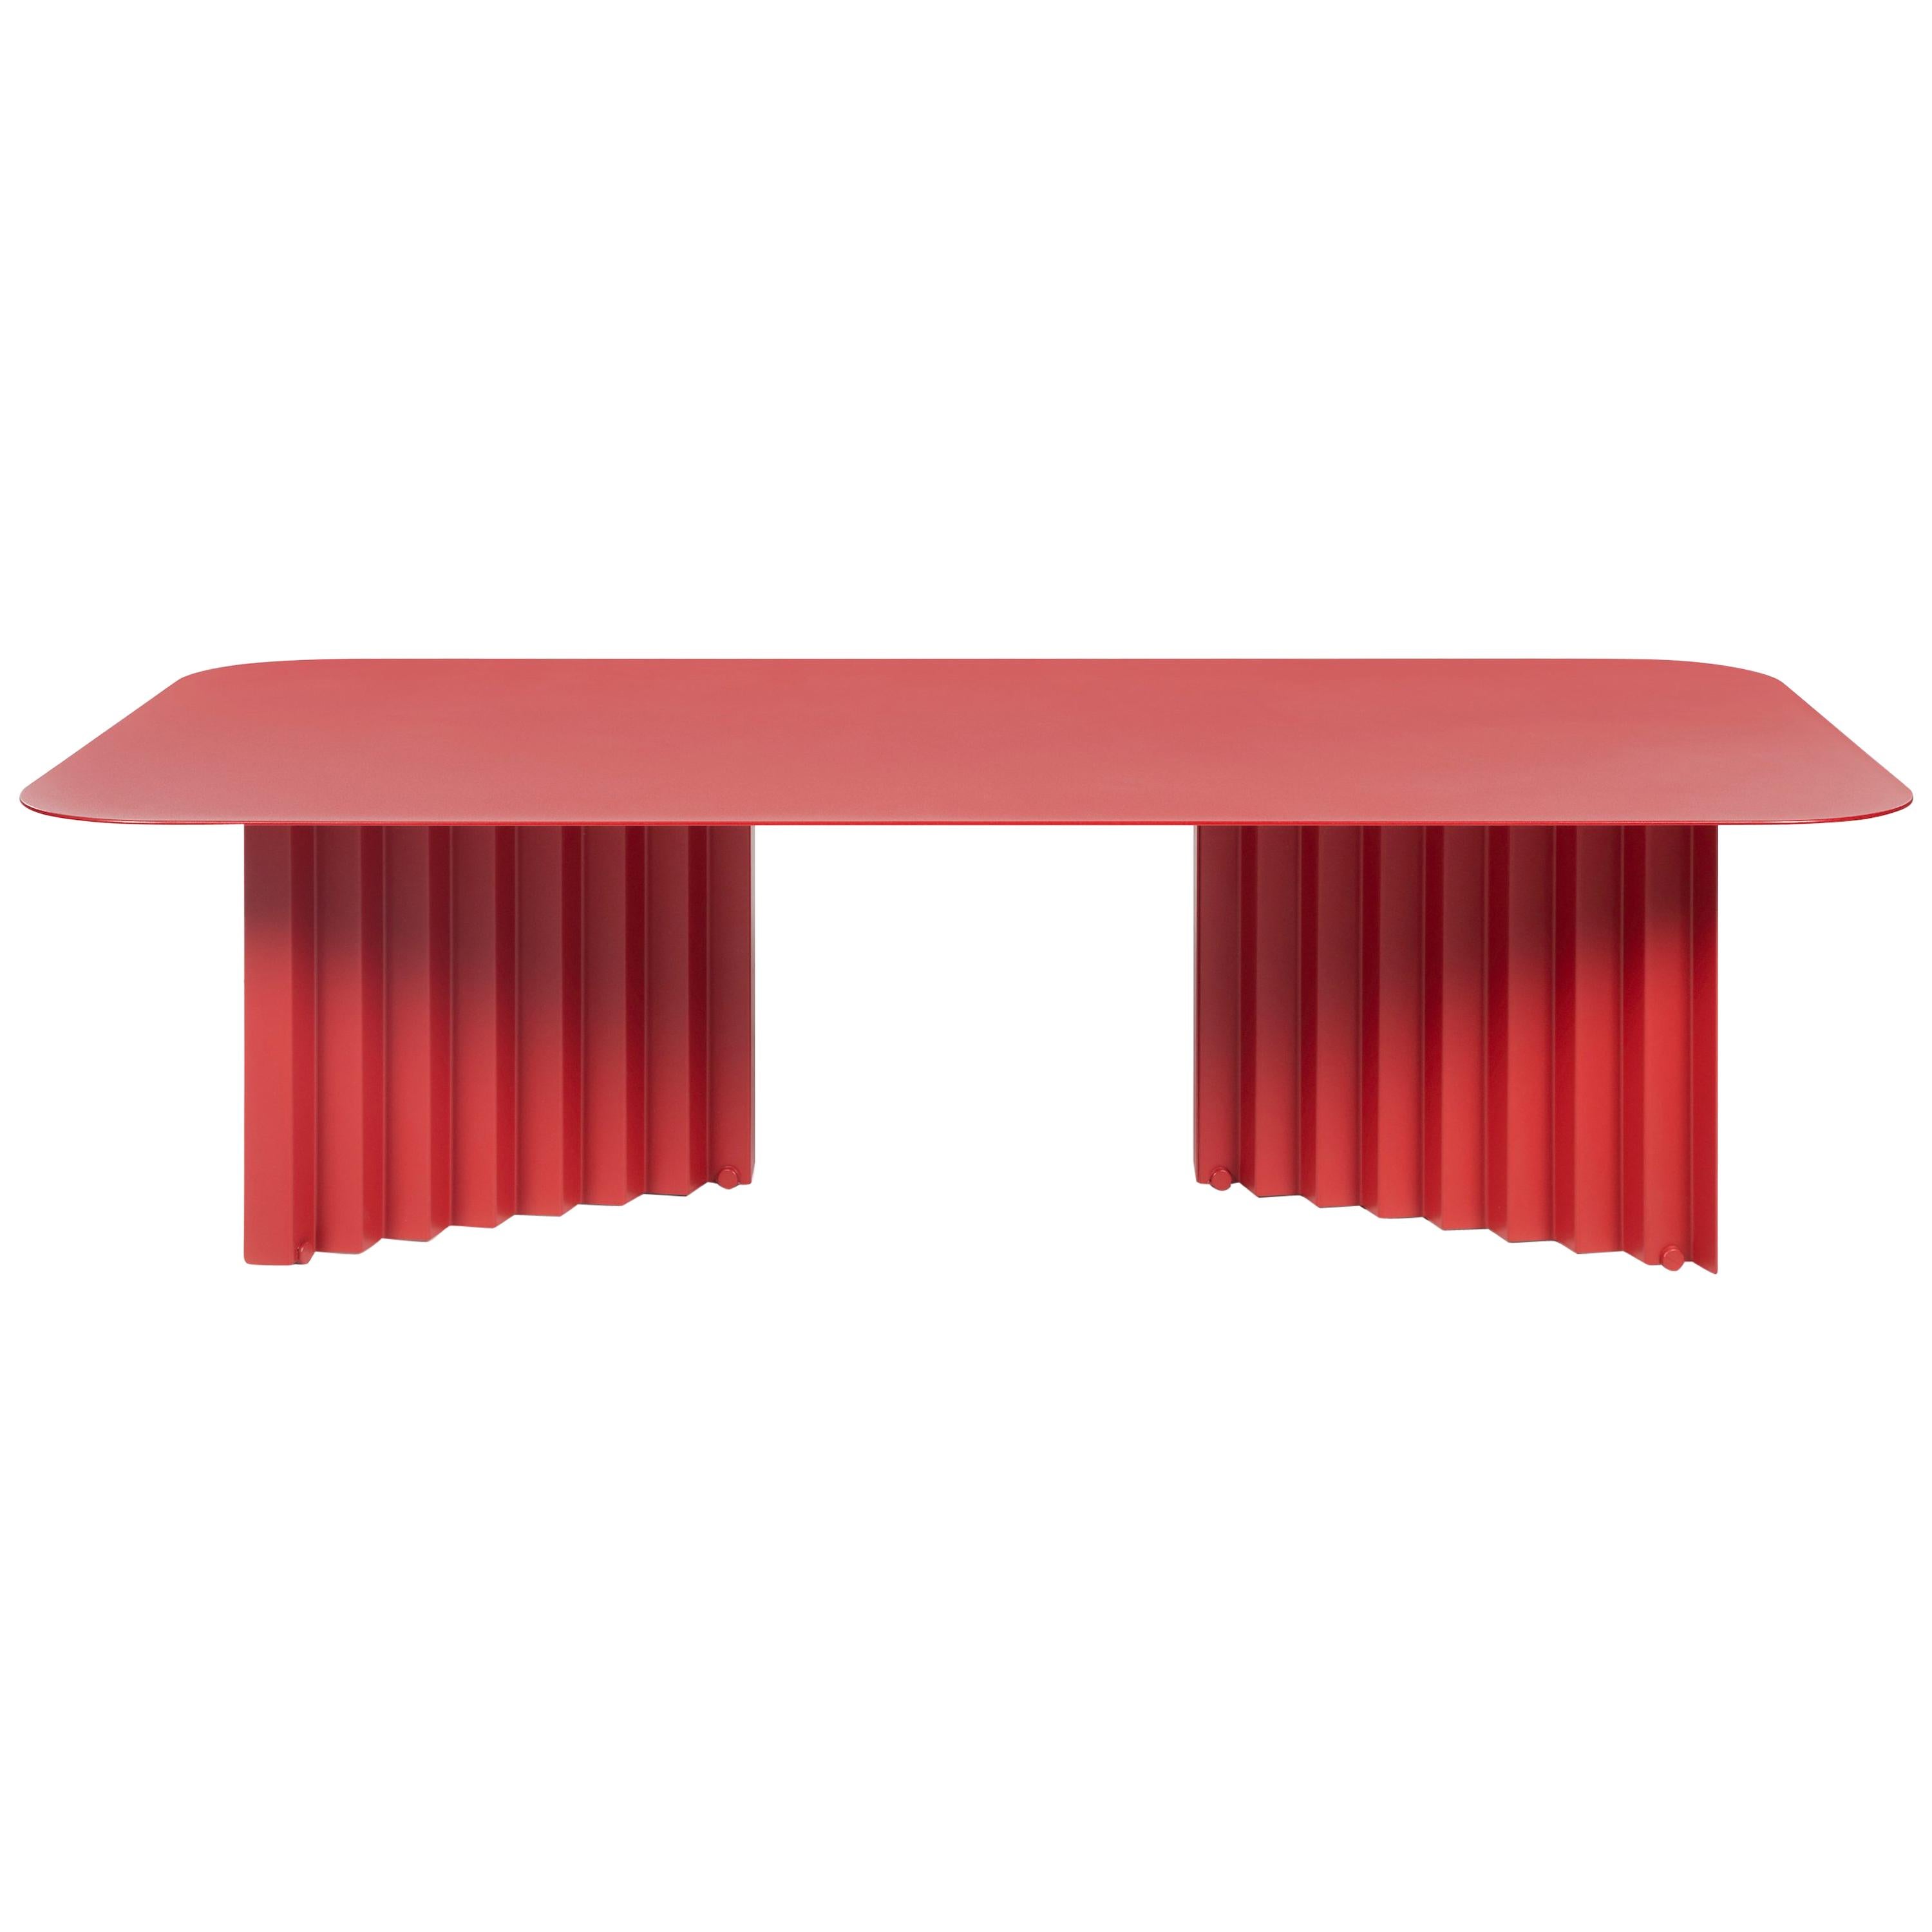 RS Barcelona Plec Large Table in Red Metal by A.P.O.